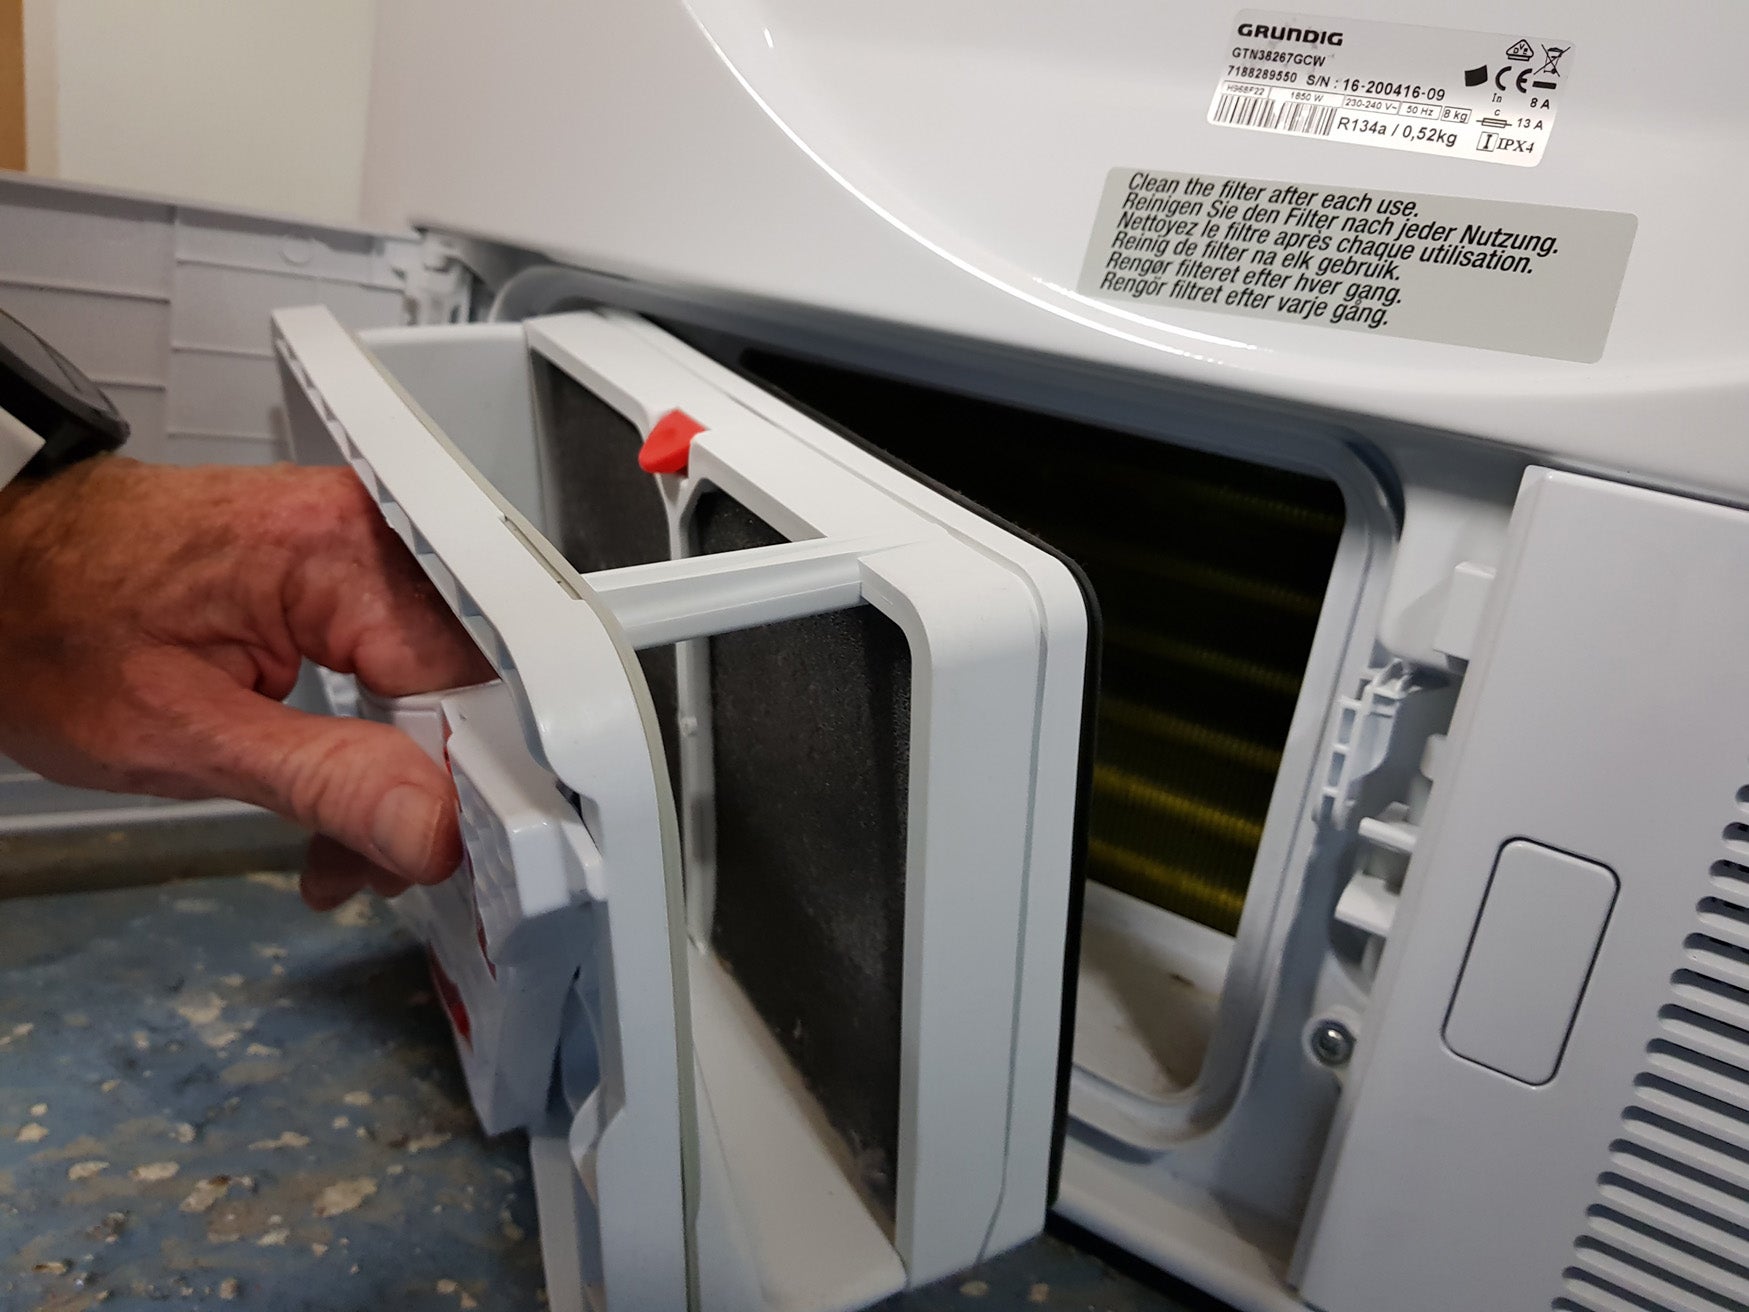 Person cleaning filter of a Grundig GTN38267GCW dryer.